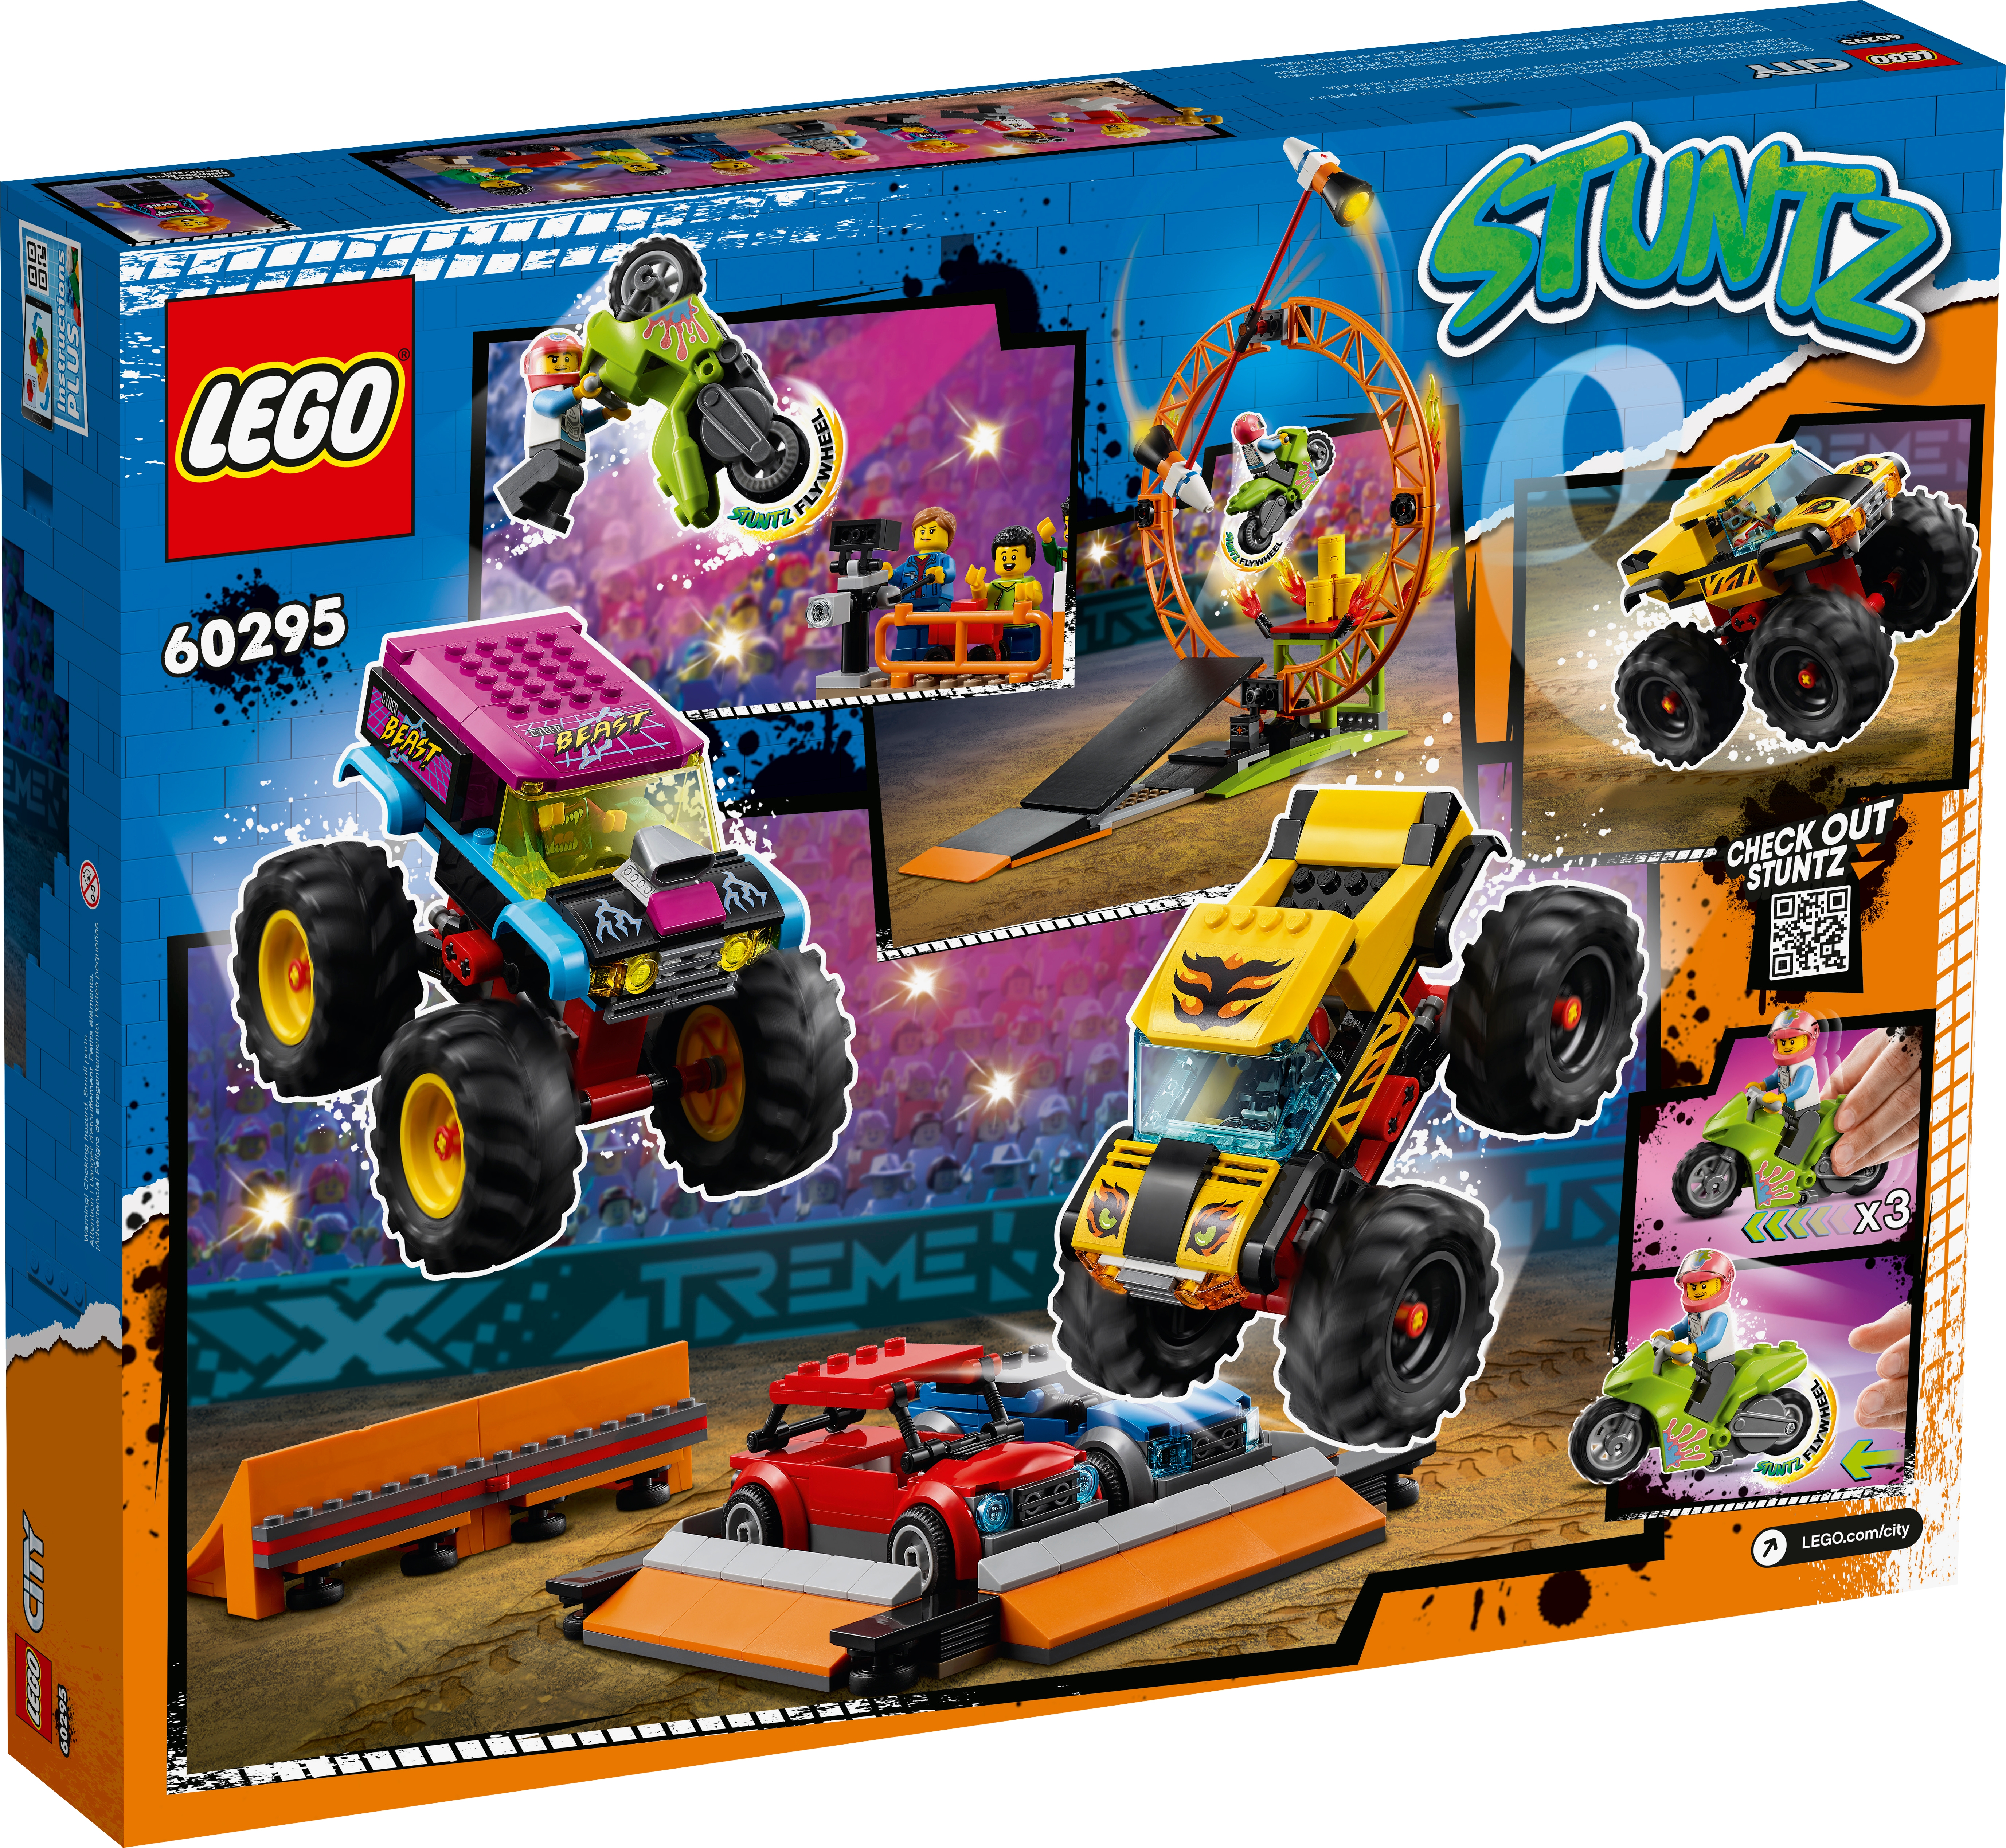 Stunt Show Arena 60295 | Shop | Buy online City the US LEGO® Official at